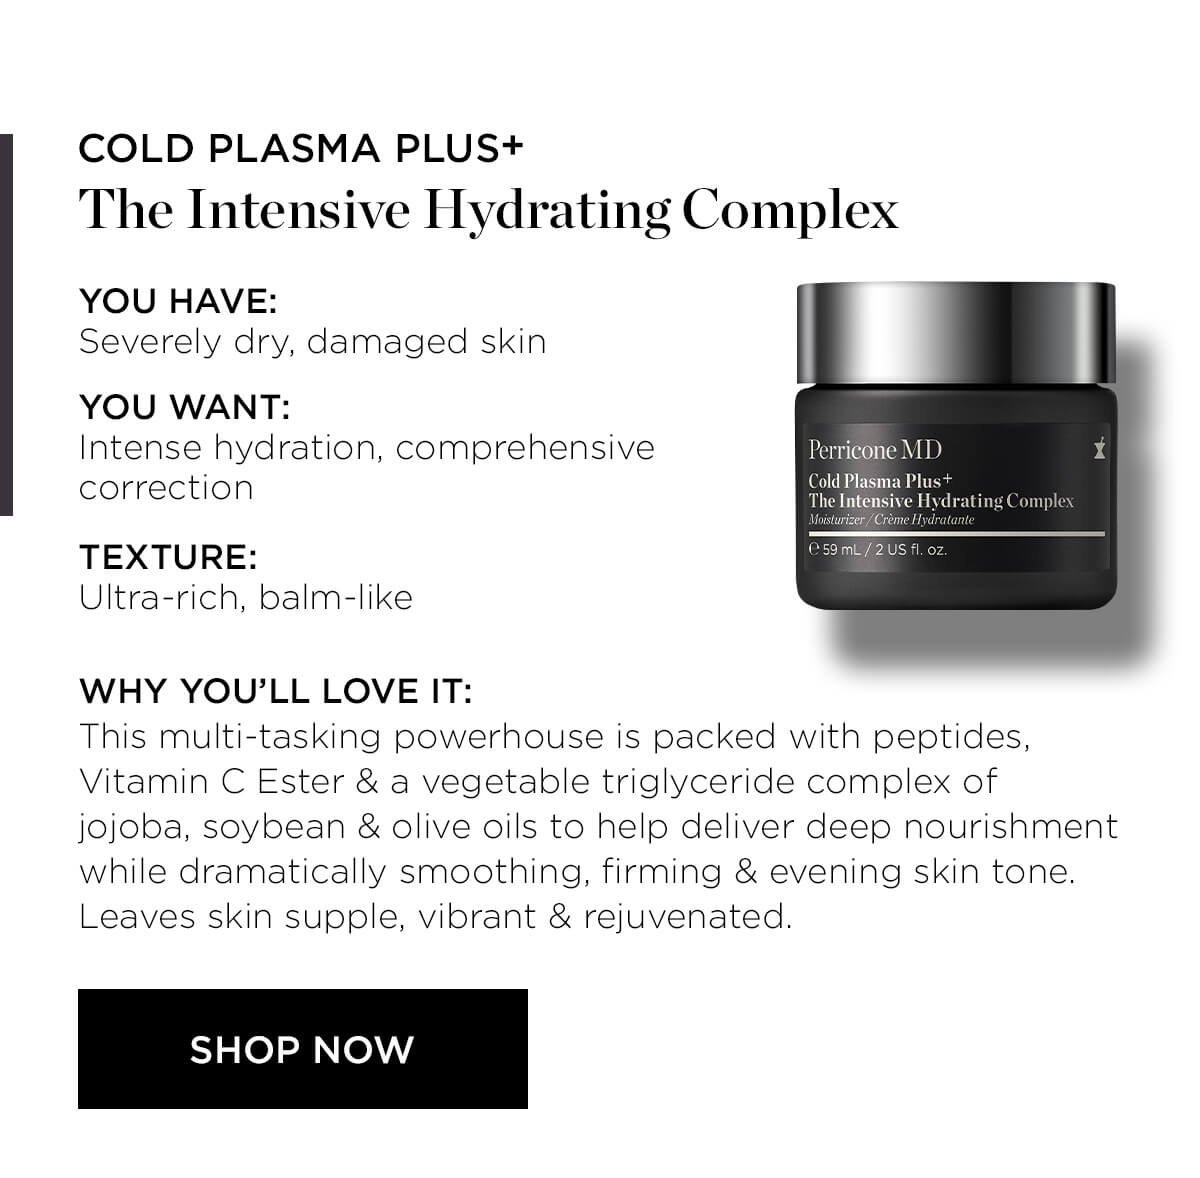 COLD PLASMA PLUS THE INTENSIVE HYDRATING COMPLEX